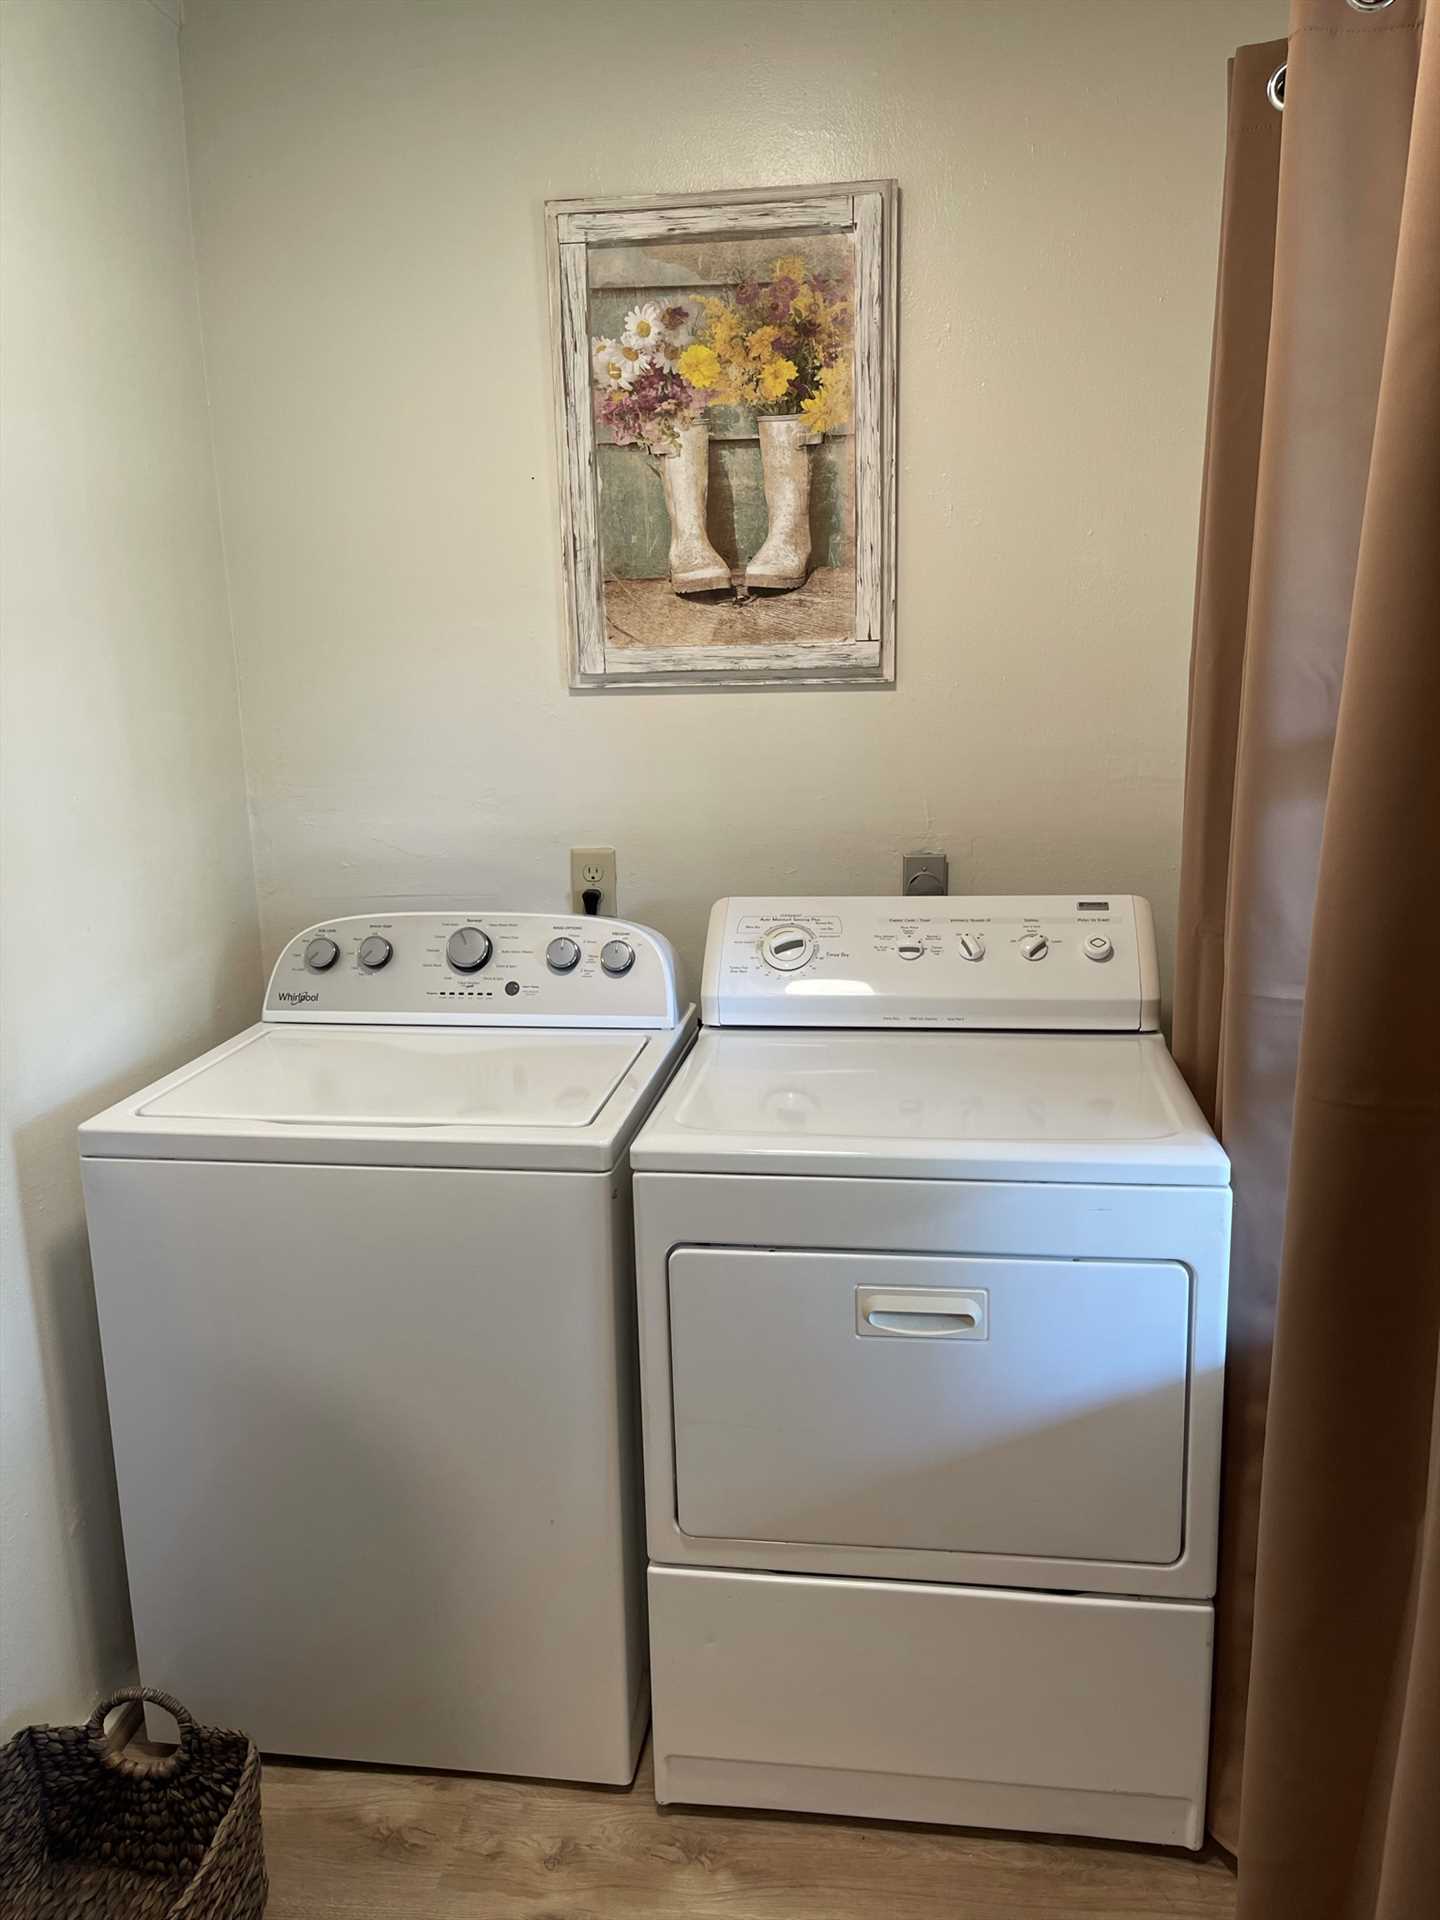                                                 No need to fight tons of laundry after your vacation, it's much easier to keep up with it in the Star's laundry room!